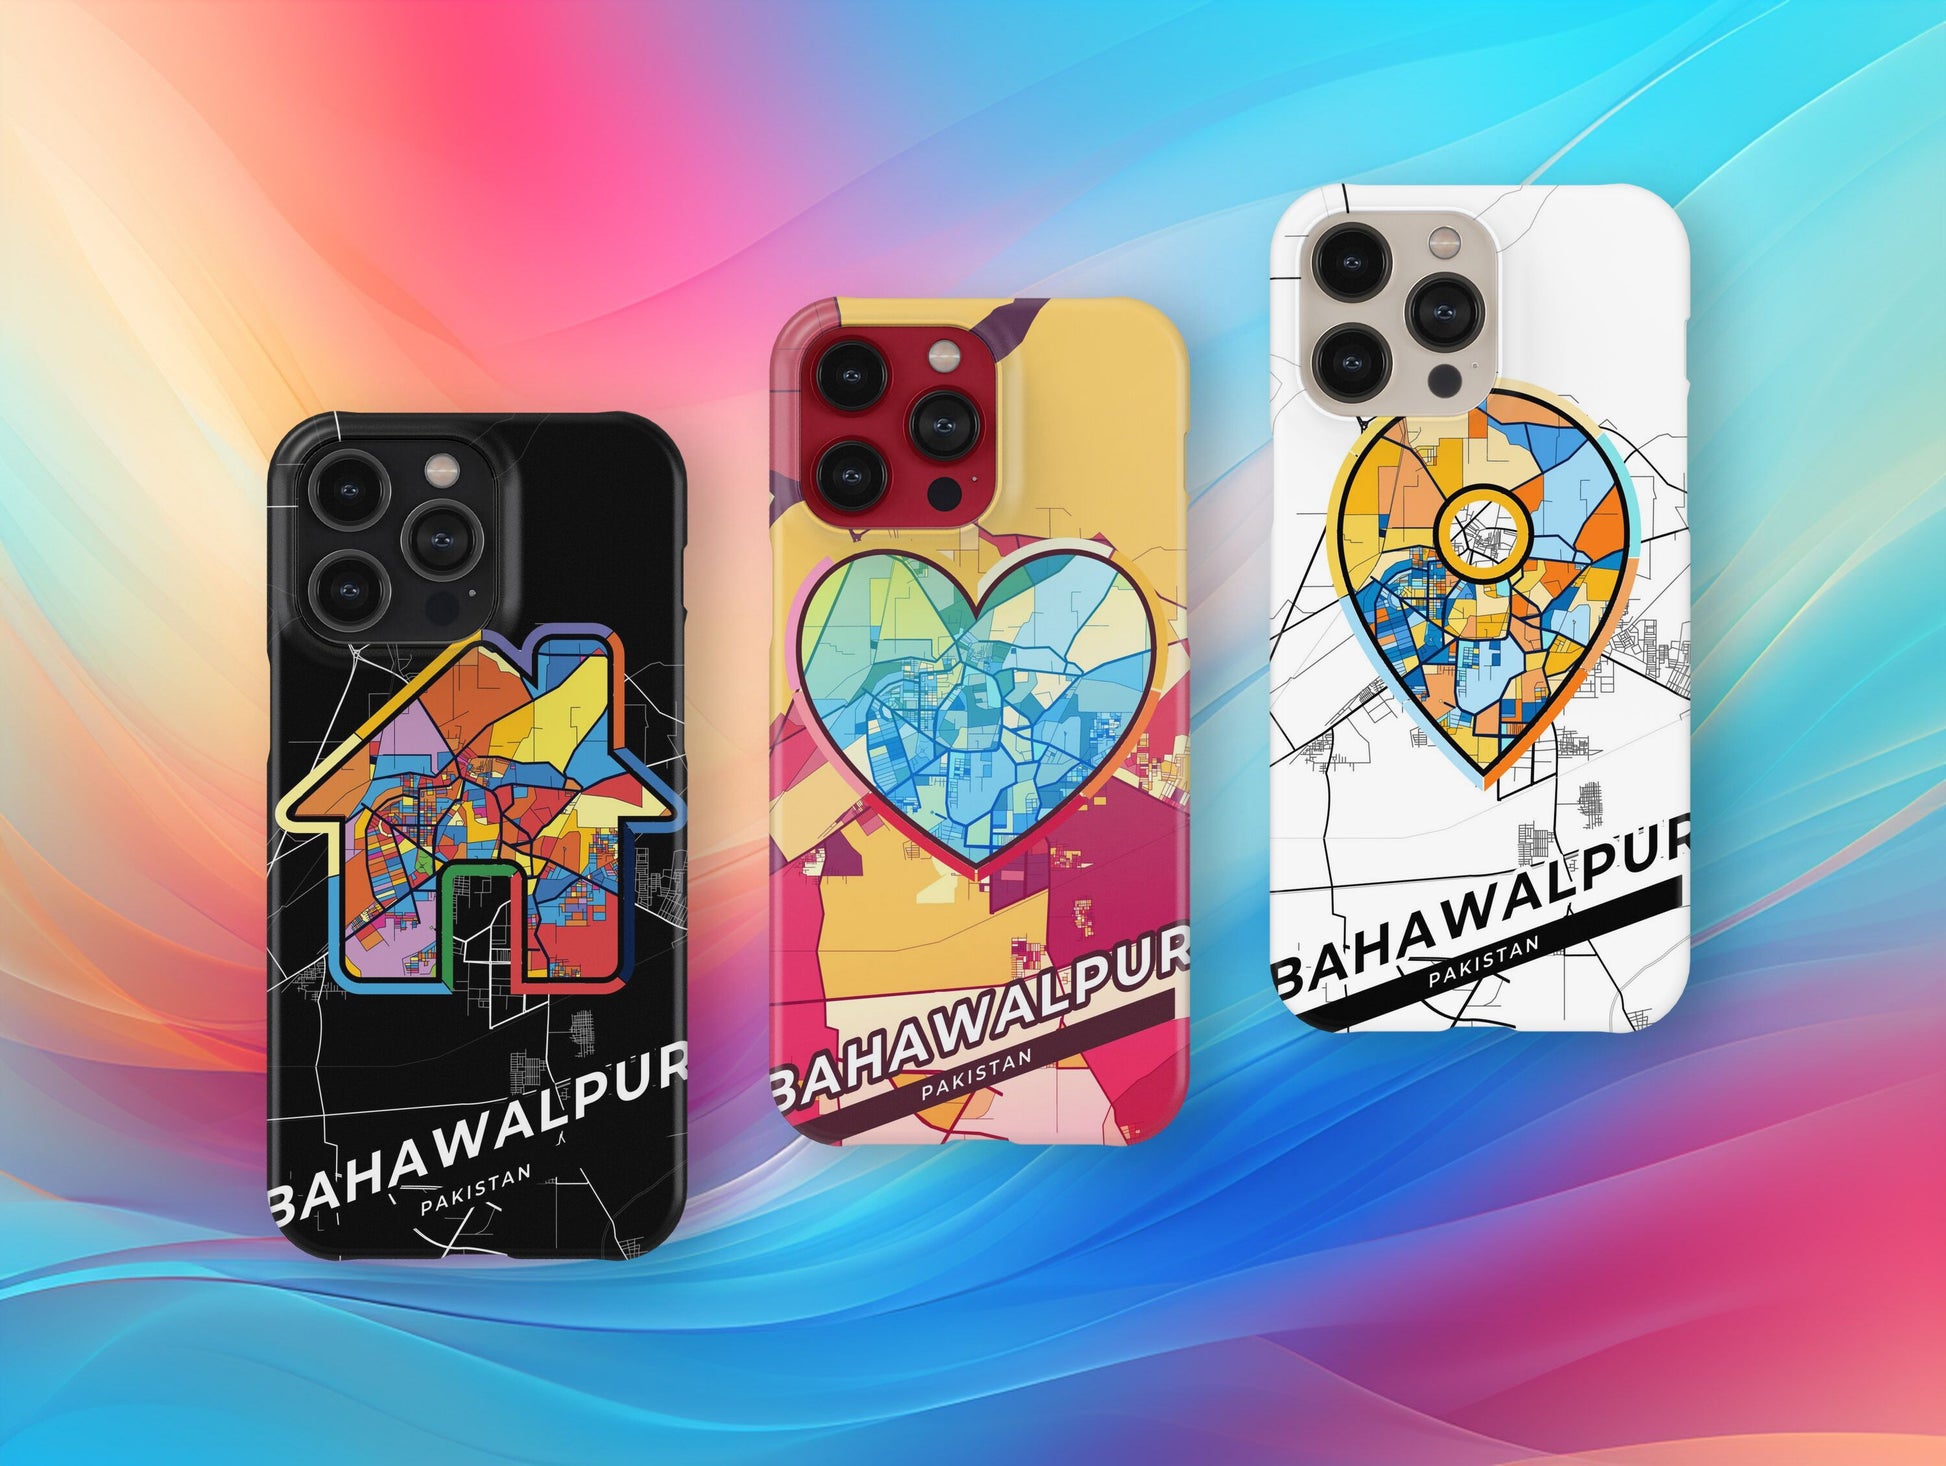 Bahawalpur Pakistan slim phone case with colorful icon. Birthday, wedding or housewarming gift. Couple match cases.